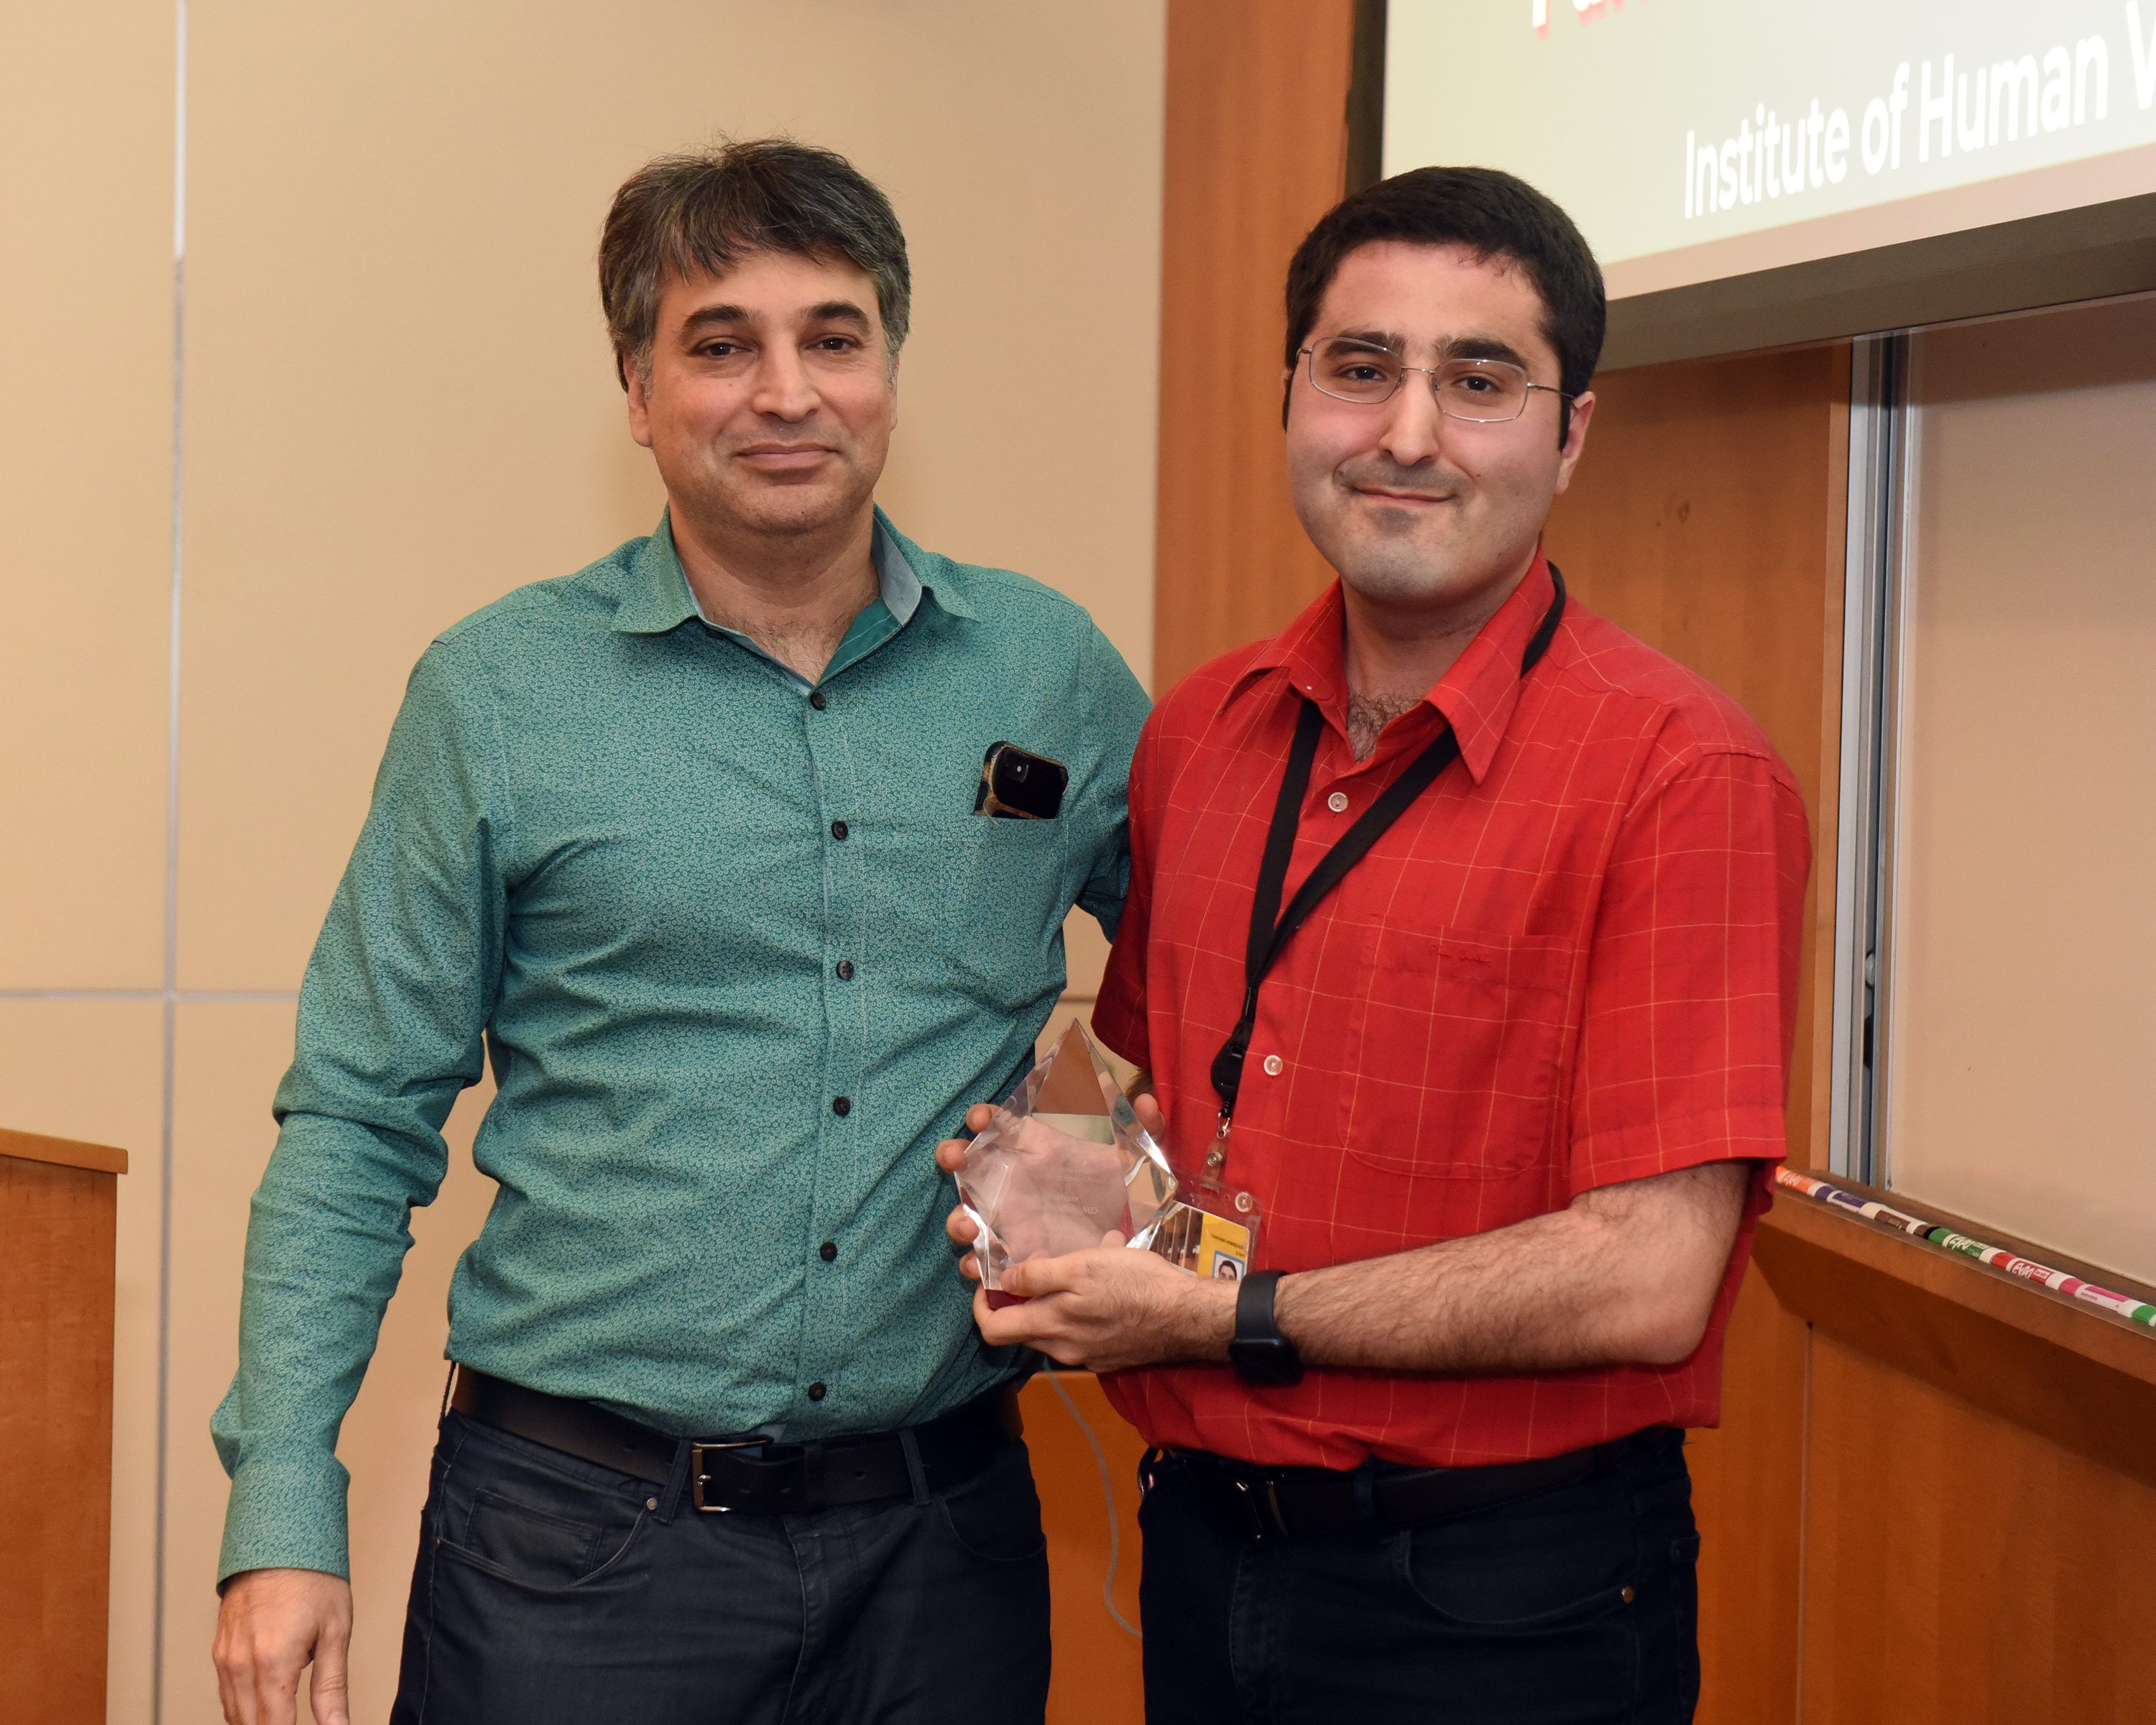 Dr. Parham Habibzadeh and Dr. Mohammad Sajadi stand next to each other. Dr. Sajadi is holding Dr. Parham Habibzadeh's Postdoctoral Service award